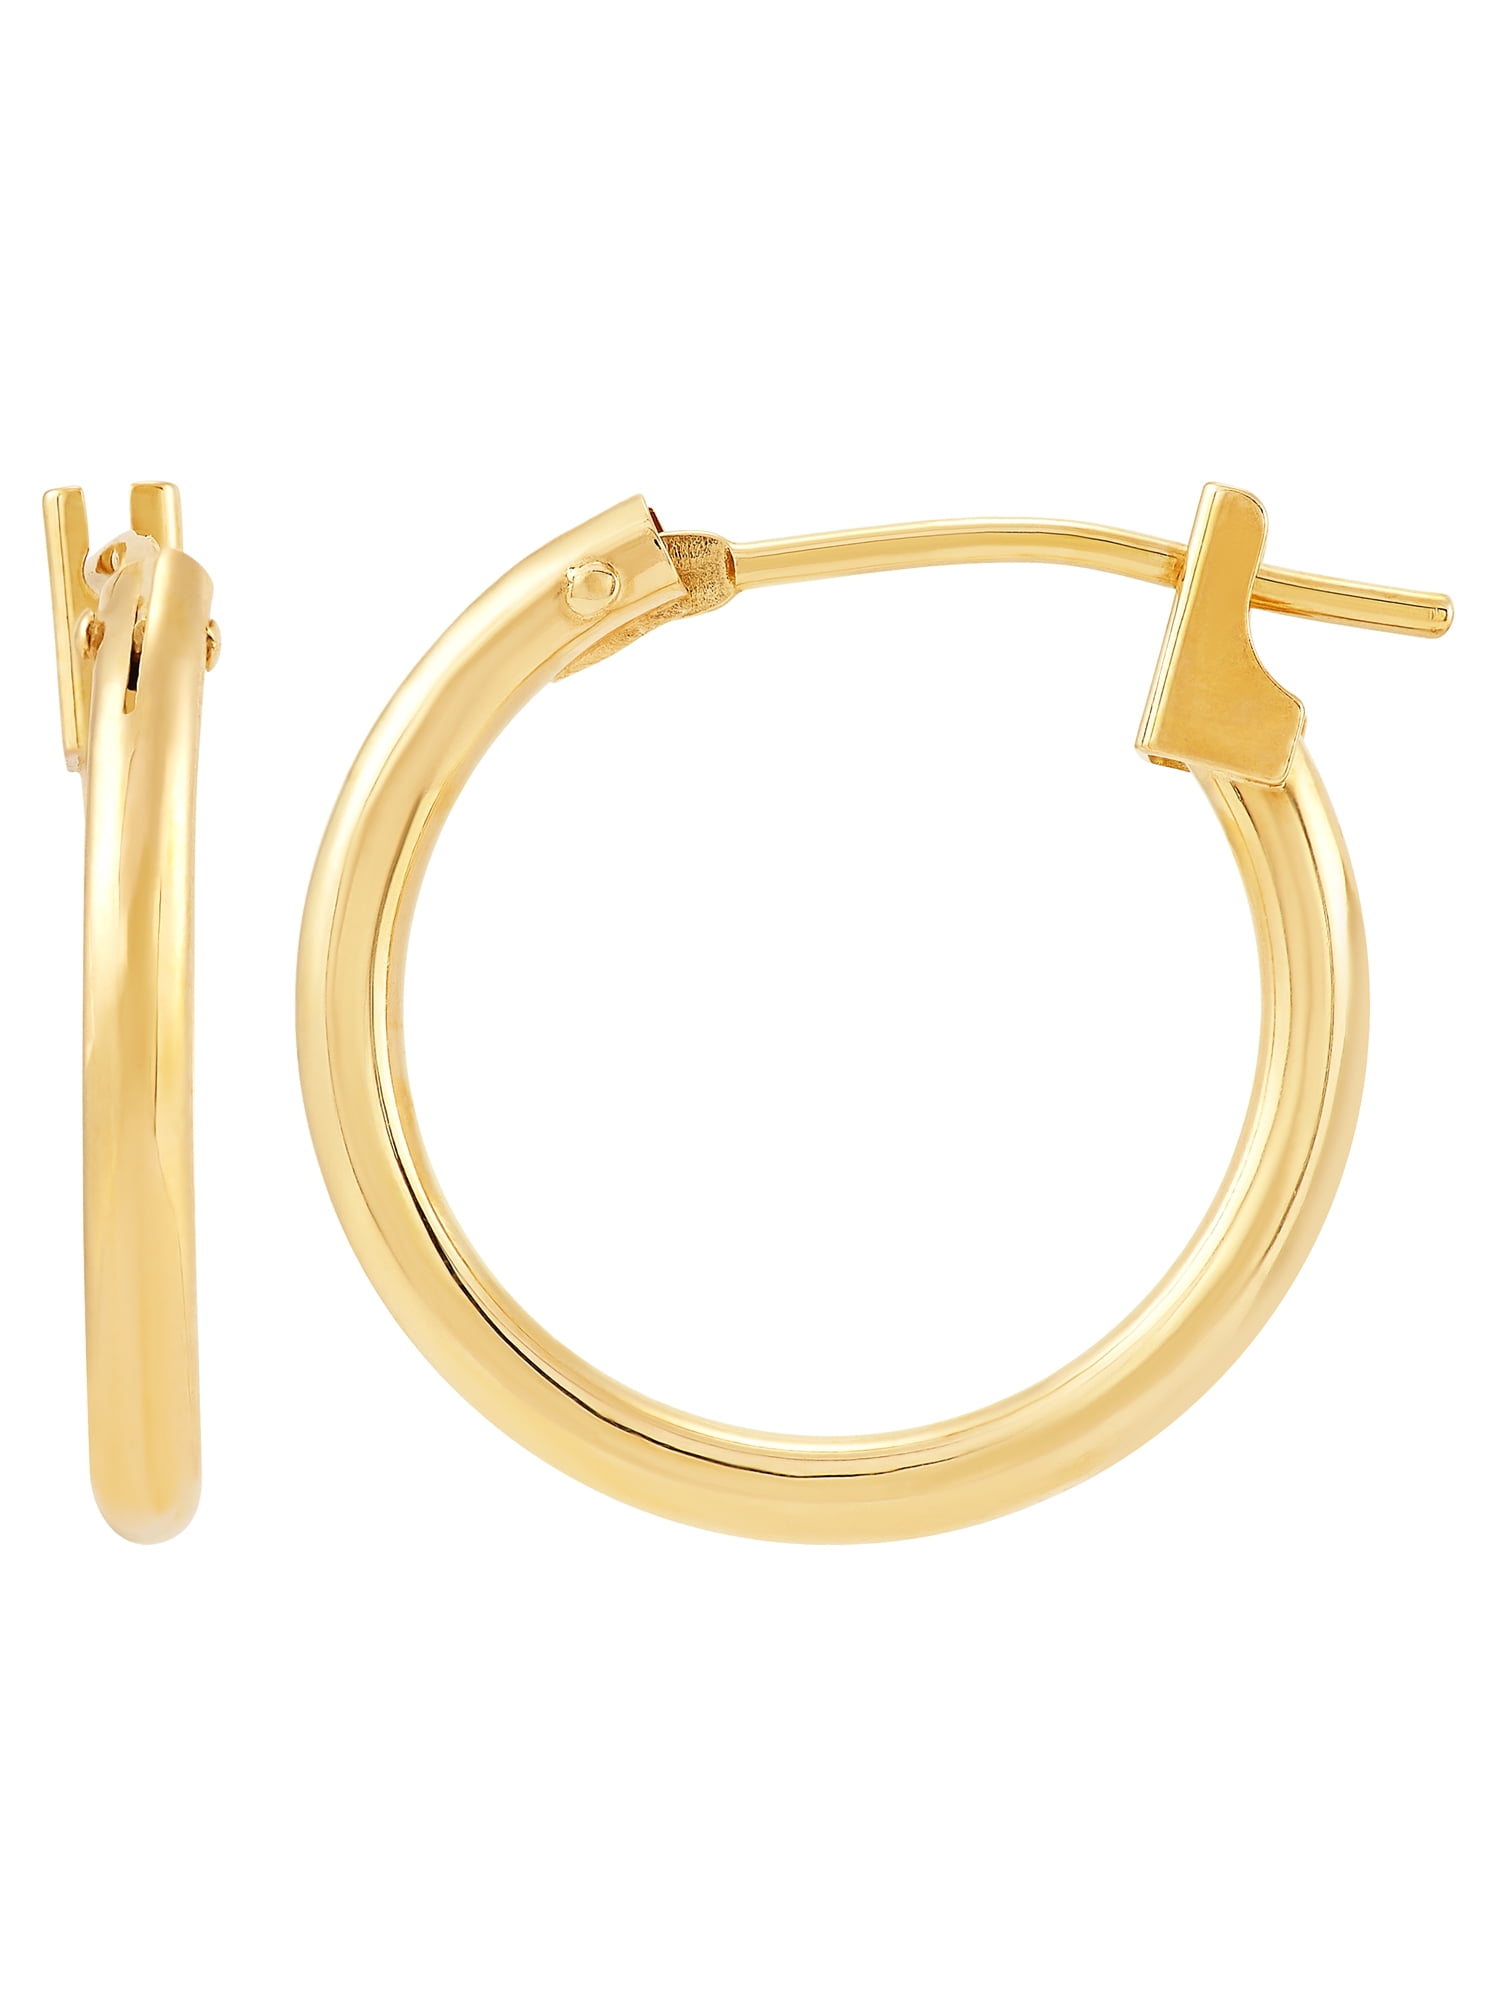 14k Yellow Gold Hollow Polished Hinged post Fancy Swirl Hoop Earrings Measures 21x16mm Wide Jewelry Gifts for Women